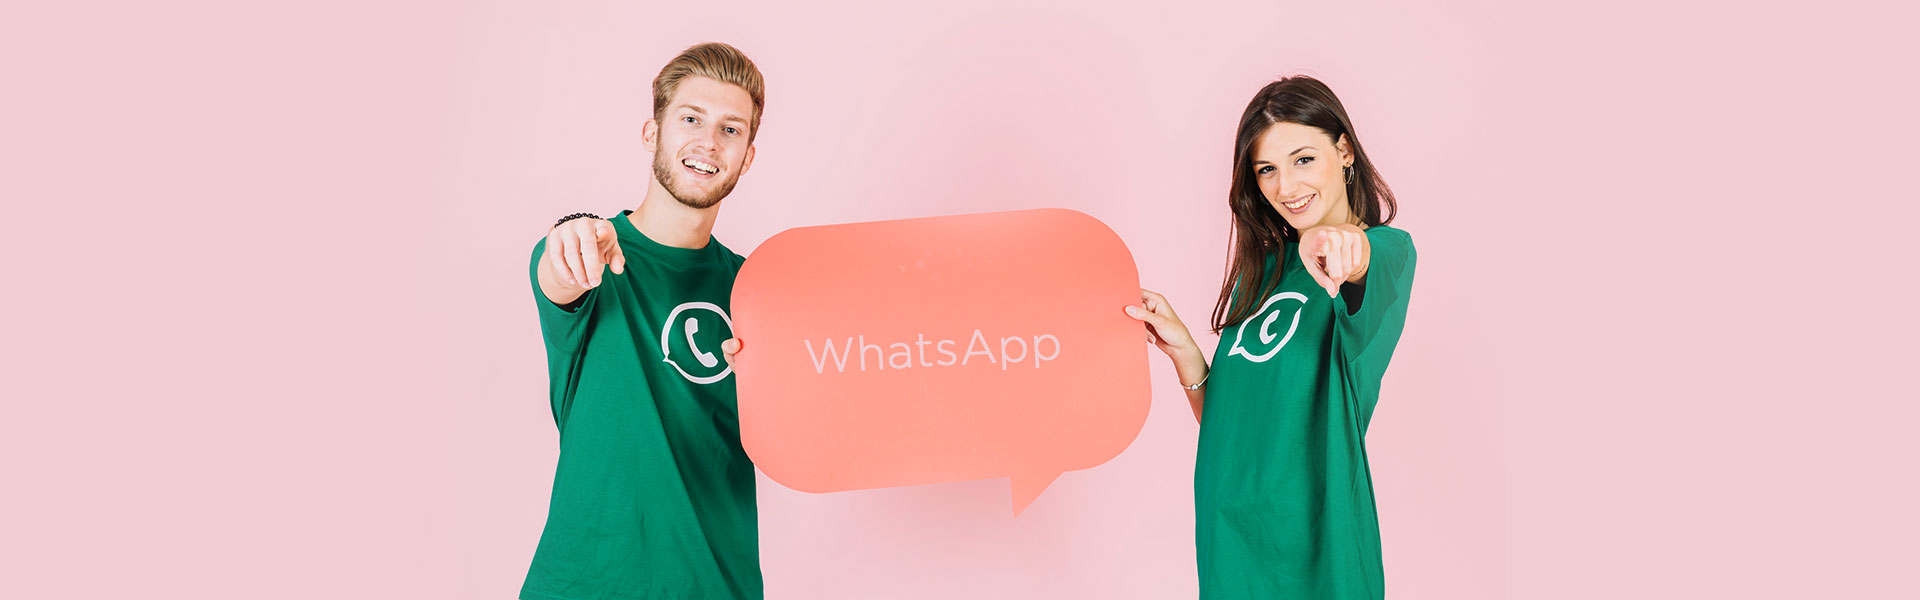 The 7 point WhatsApp marketing strategy for your business